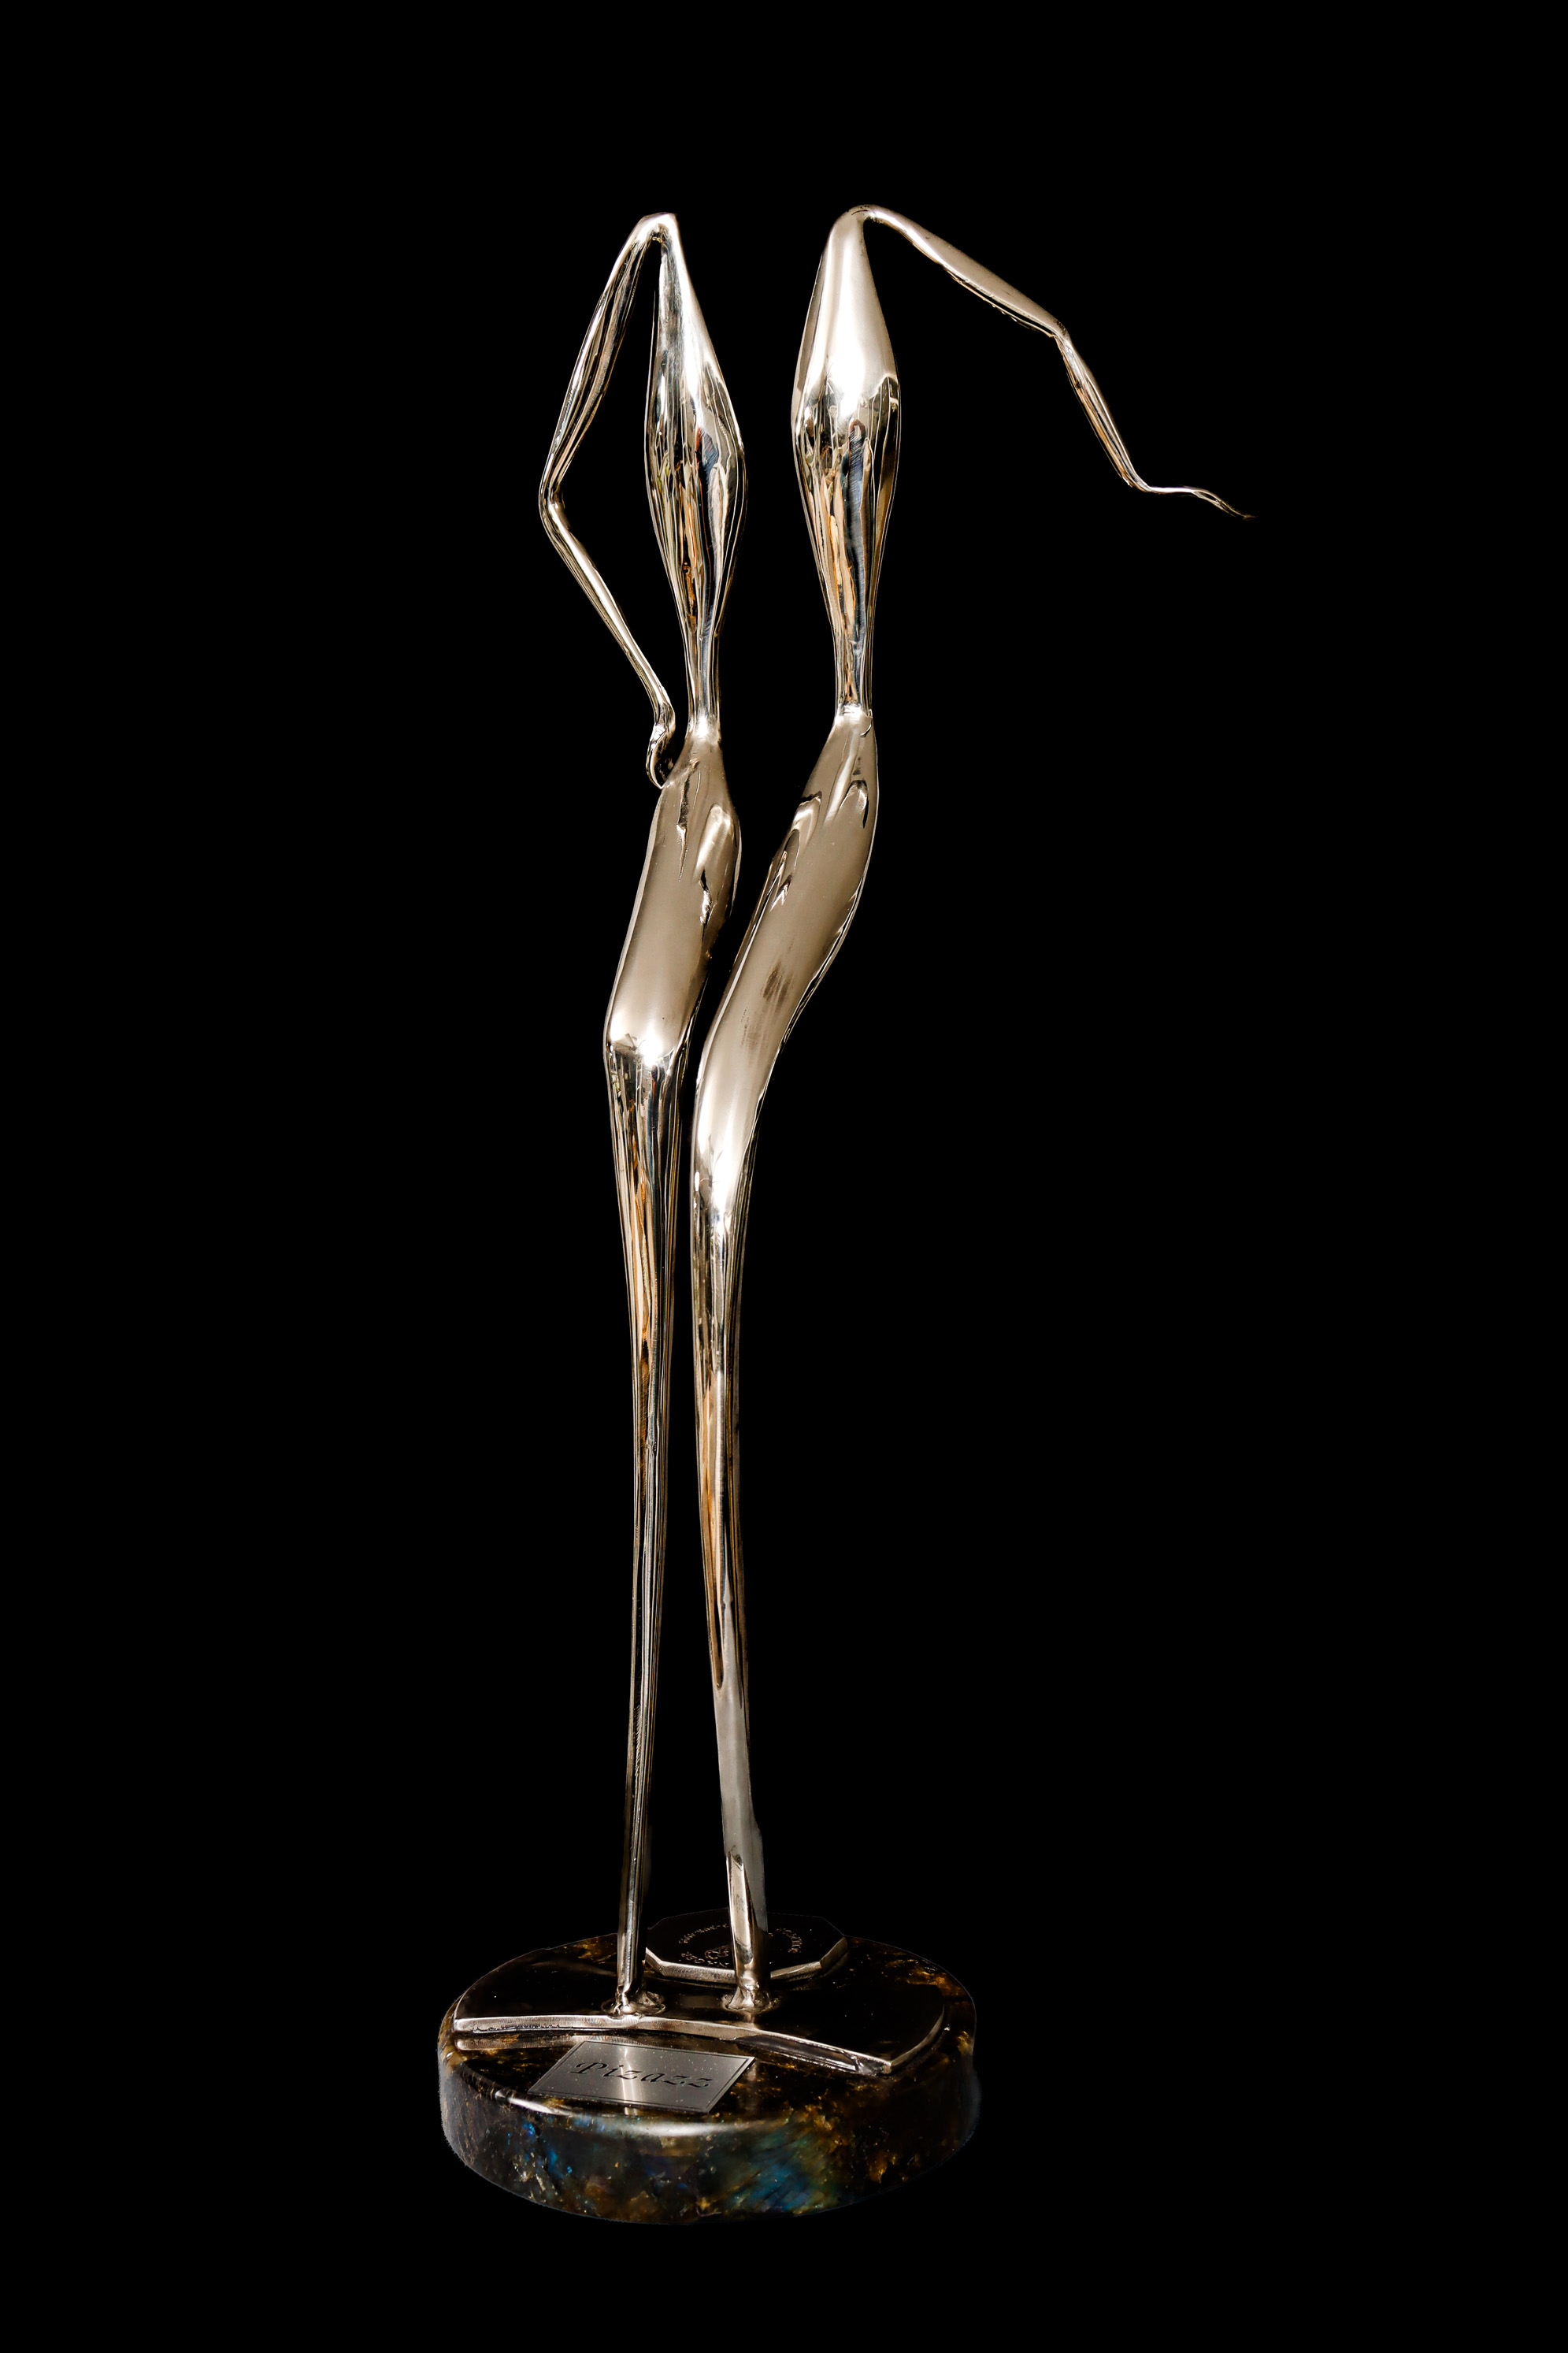 Pizazz, Polished Stainless Steel Sculpture